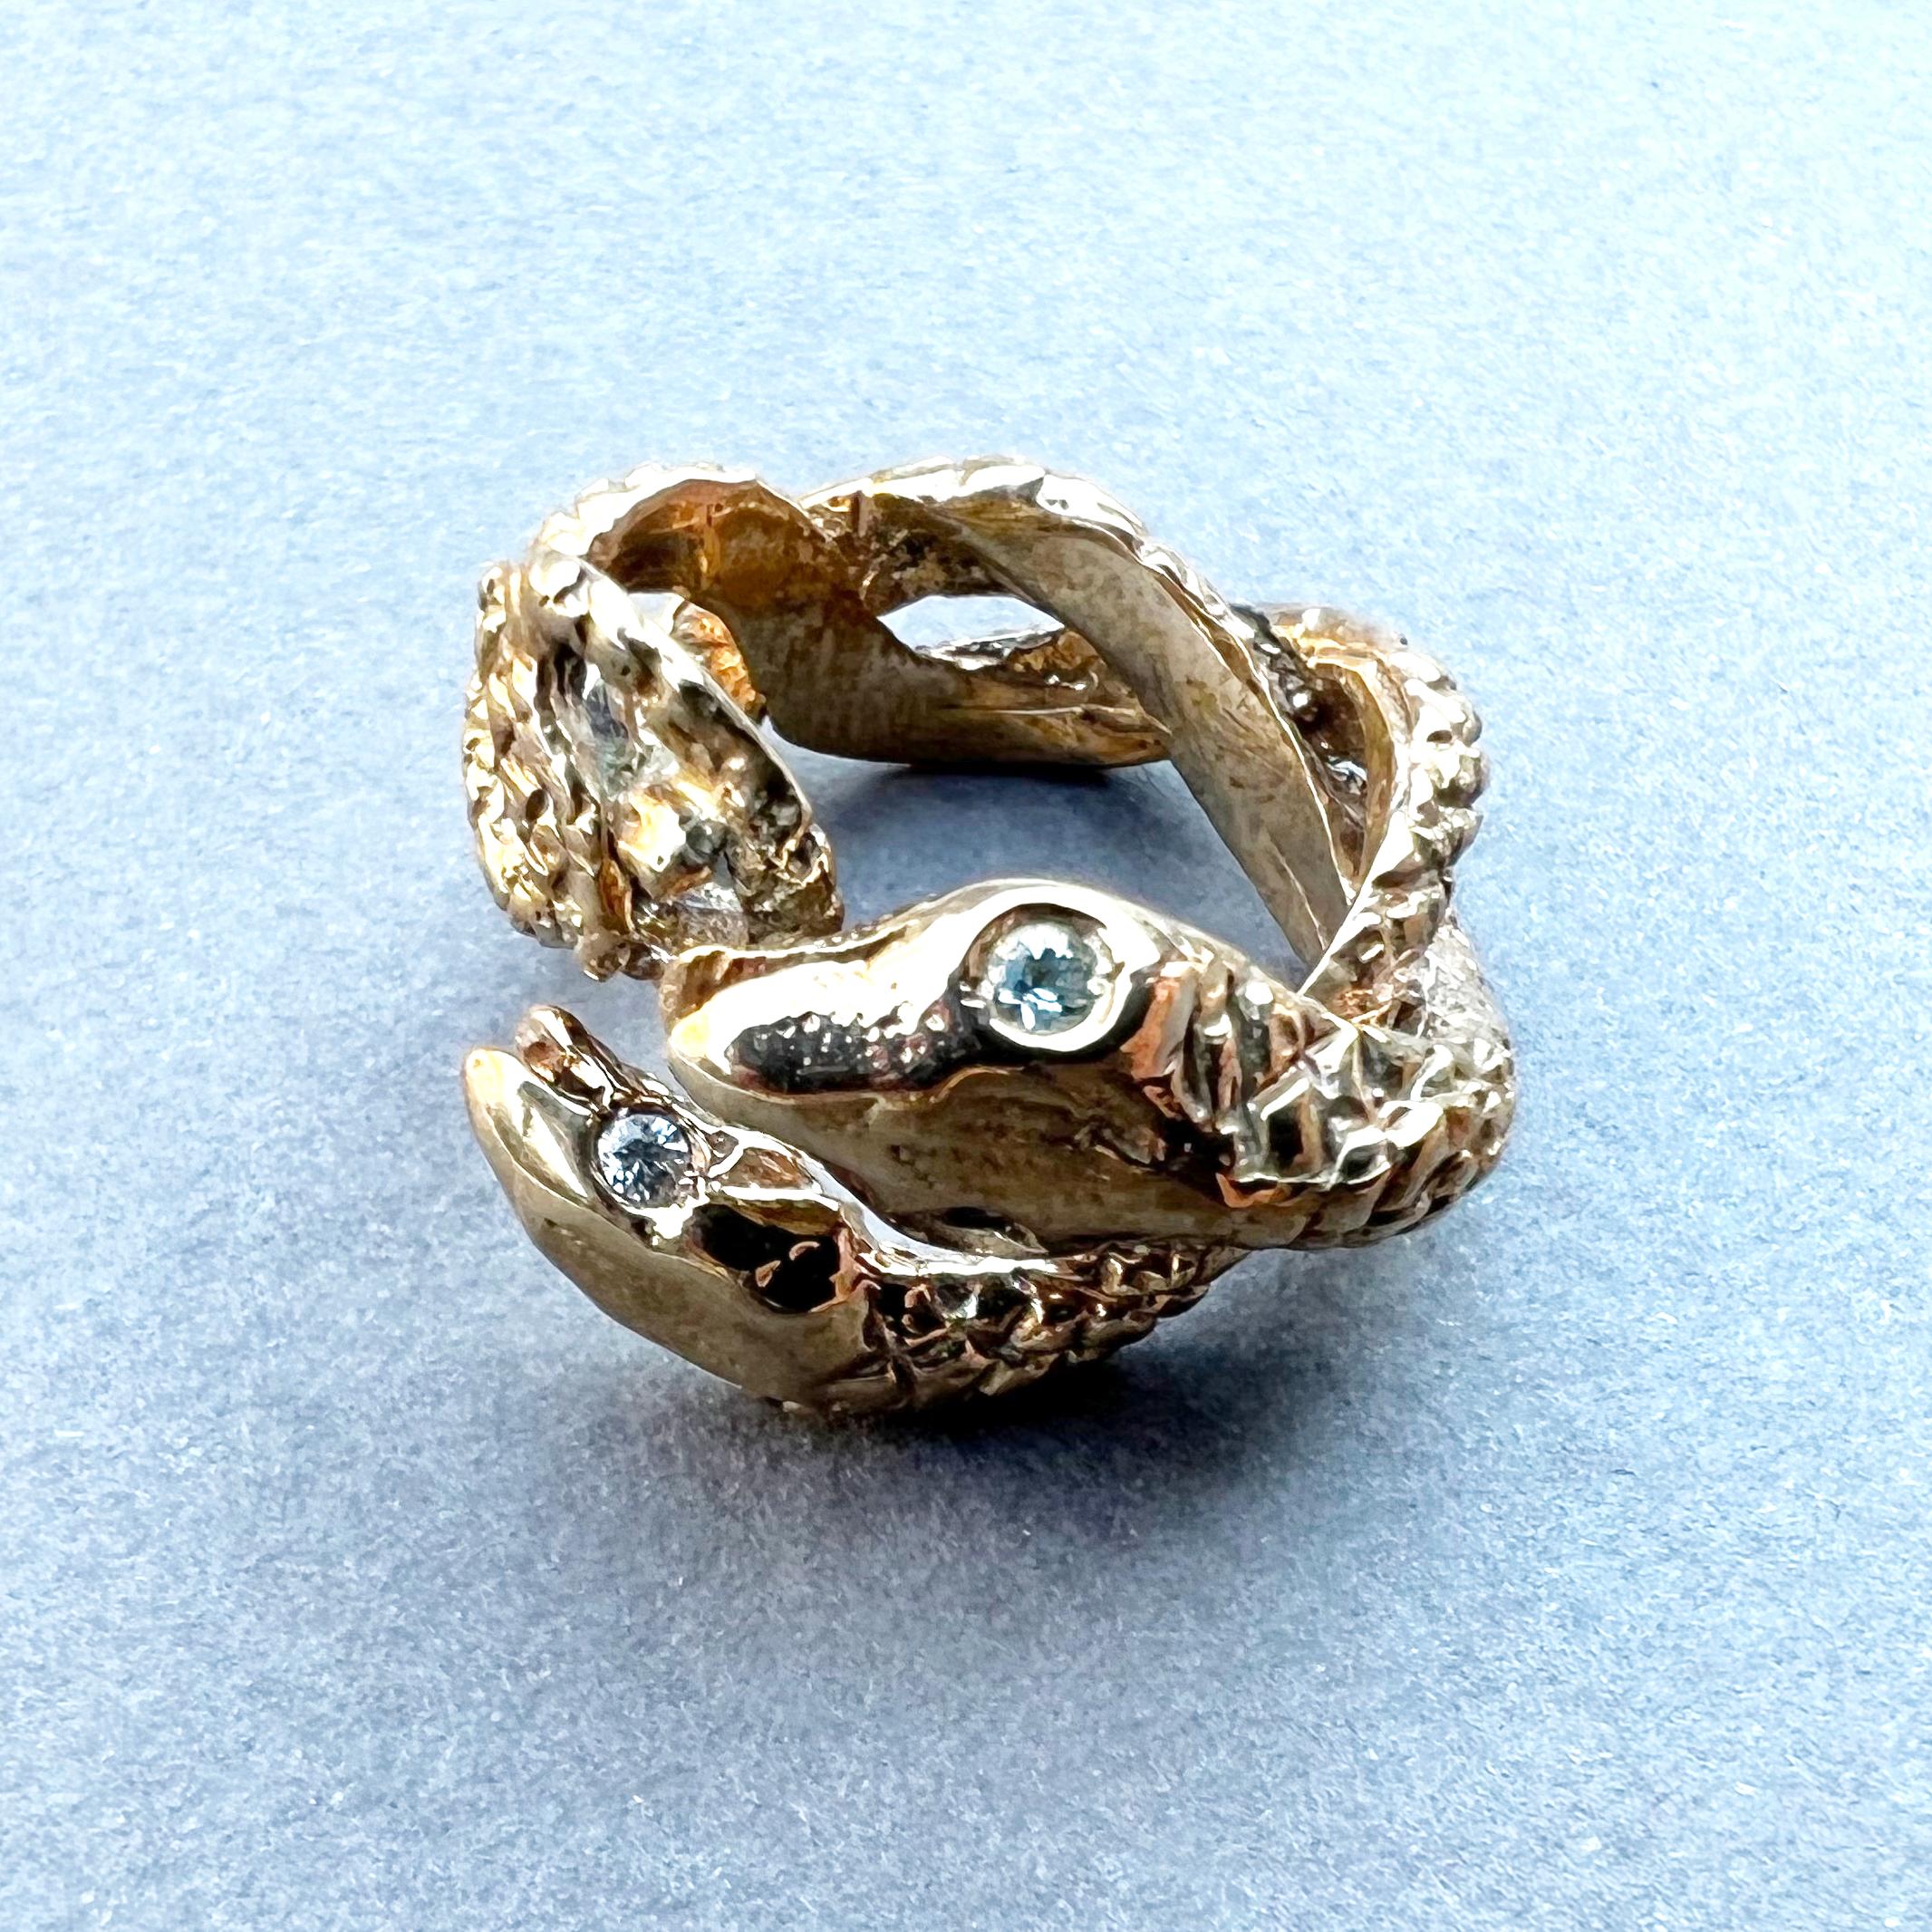 Animal jewelry Aquamarine Snake Ring Bronze Cocktail Ring J Dauphin For Sale 2